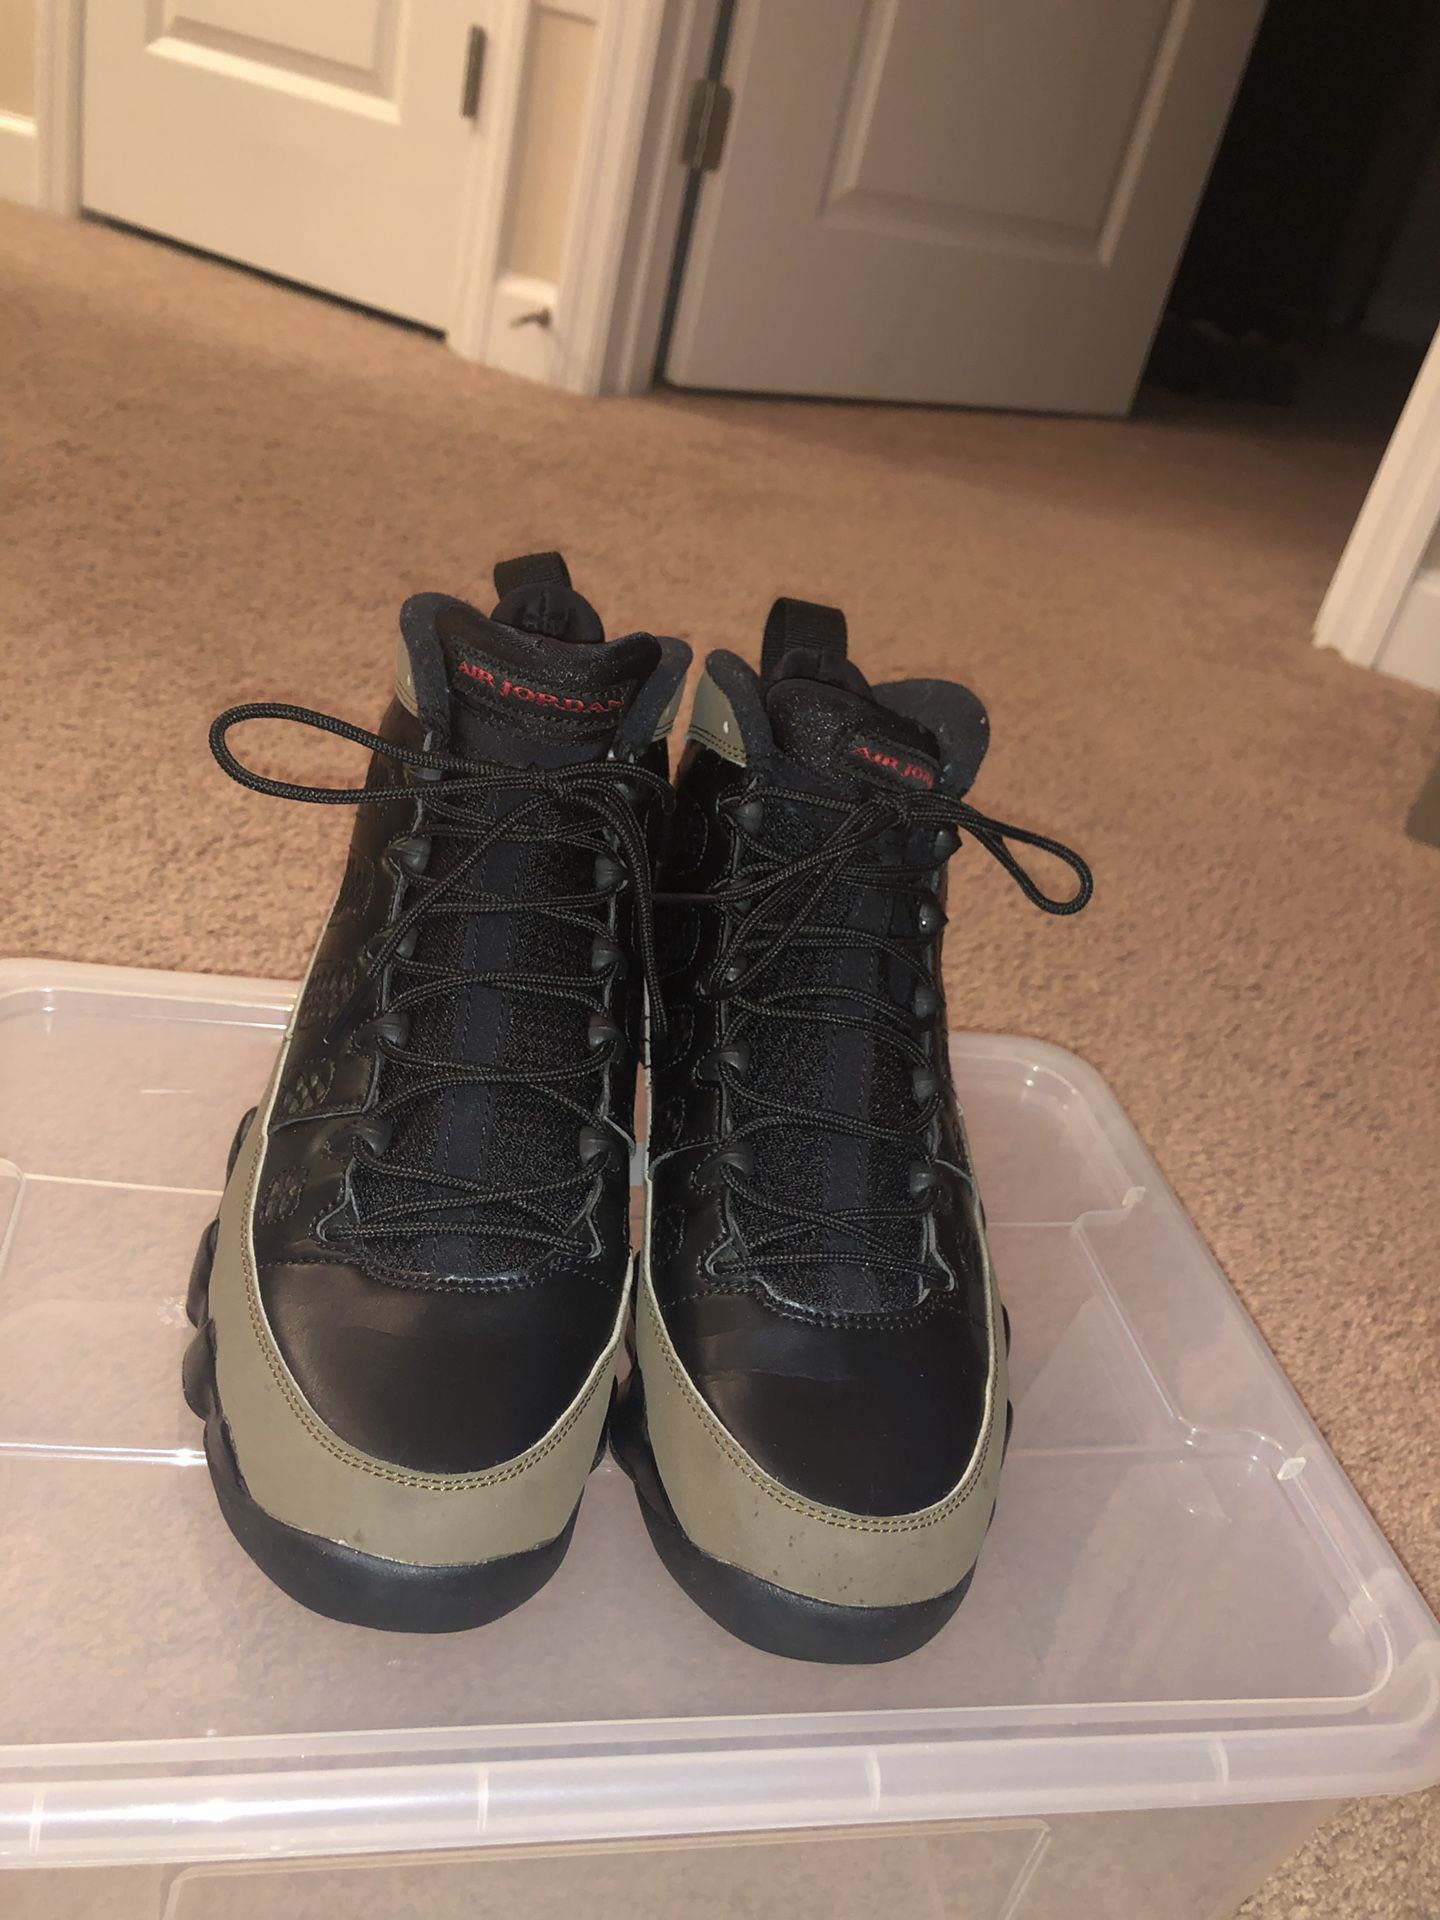 Olive 9s Size 8